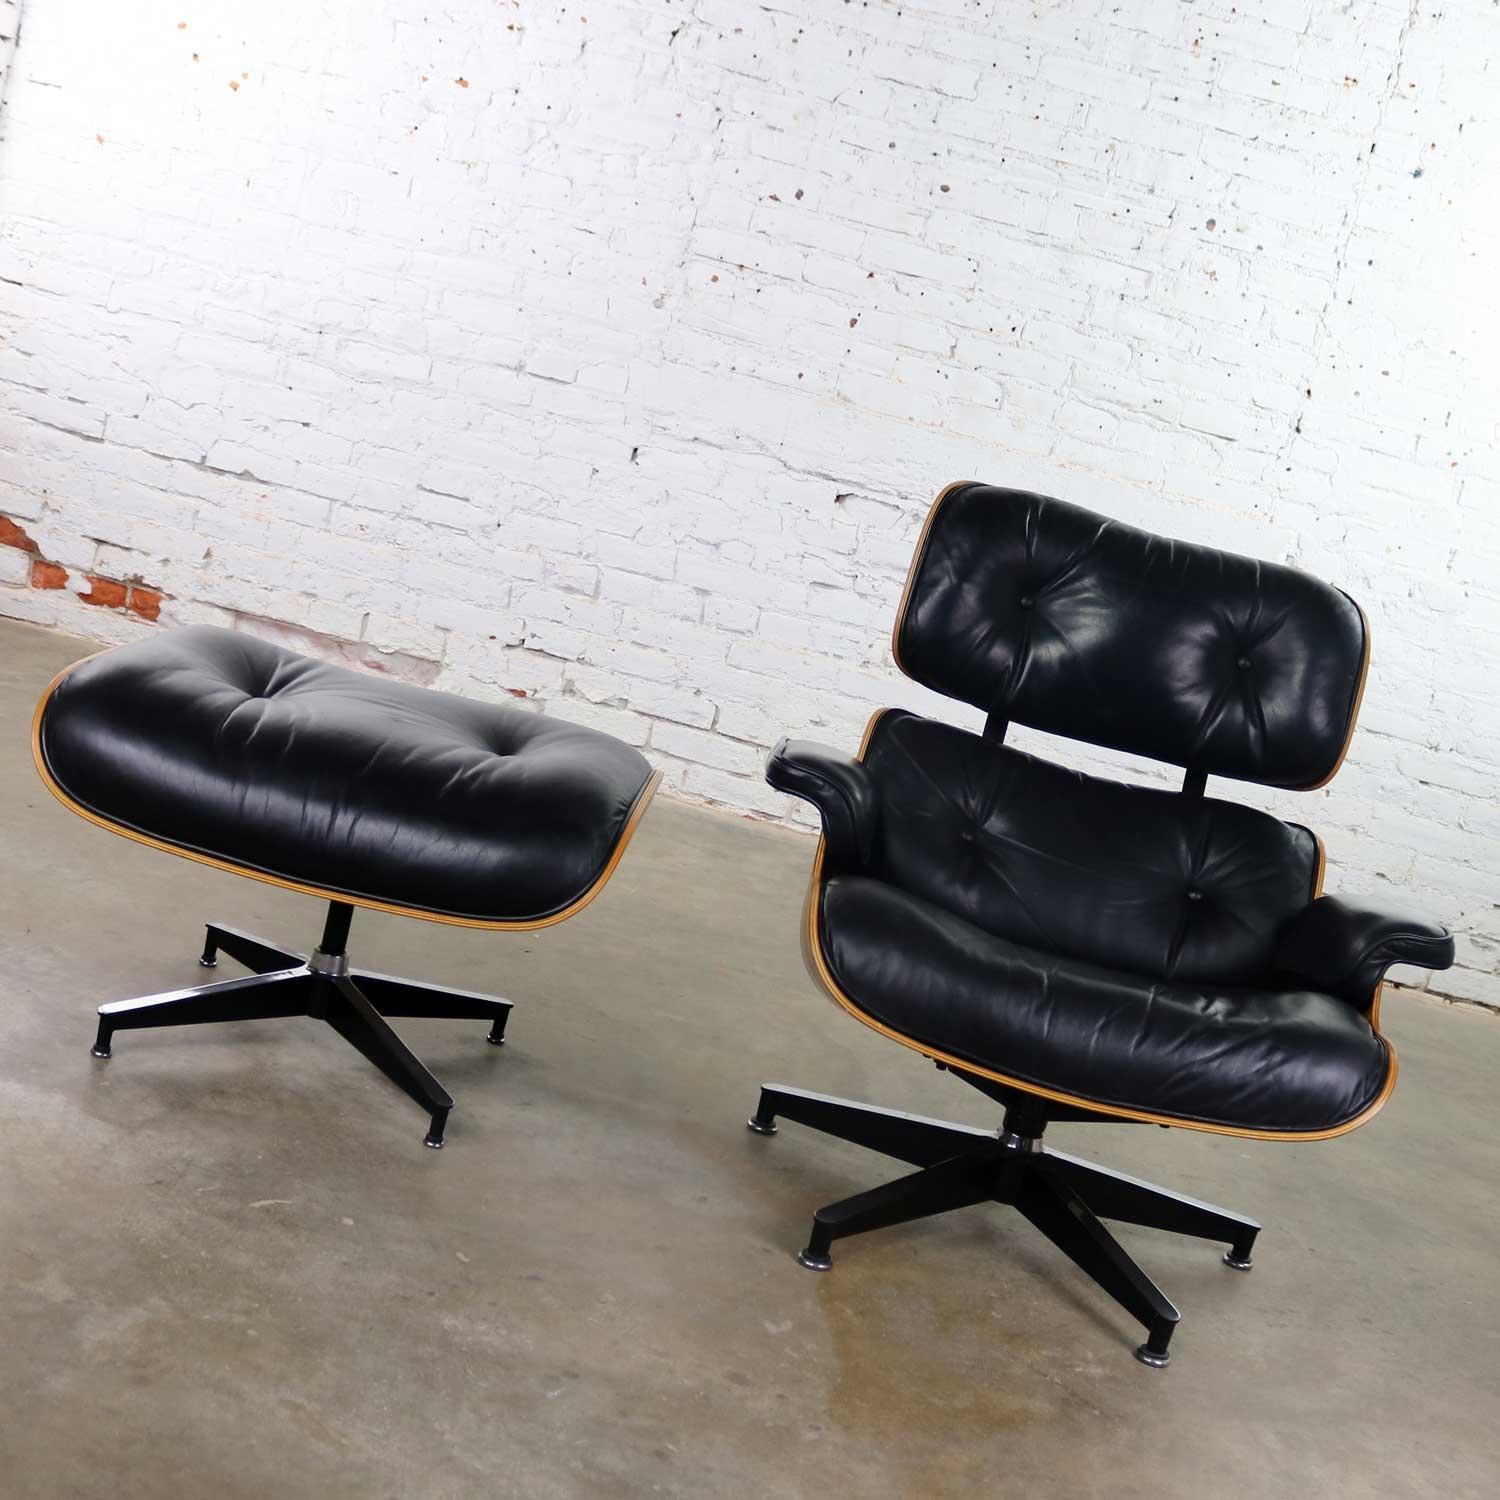 20th Century Vintage Eames Lounge Chair & Ottoman in Black Leather & Rosewood Herman Miller